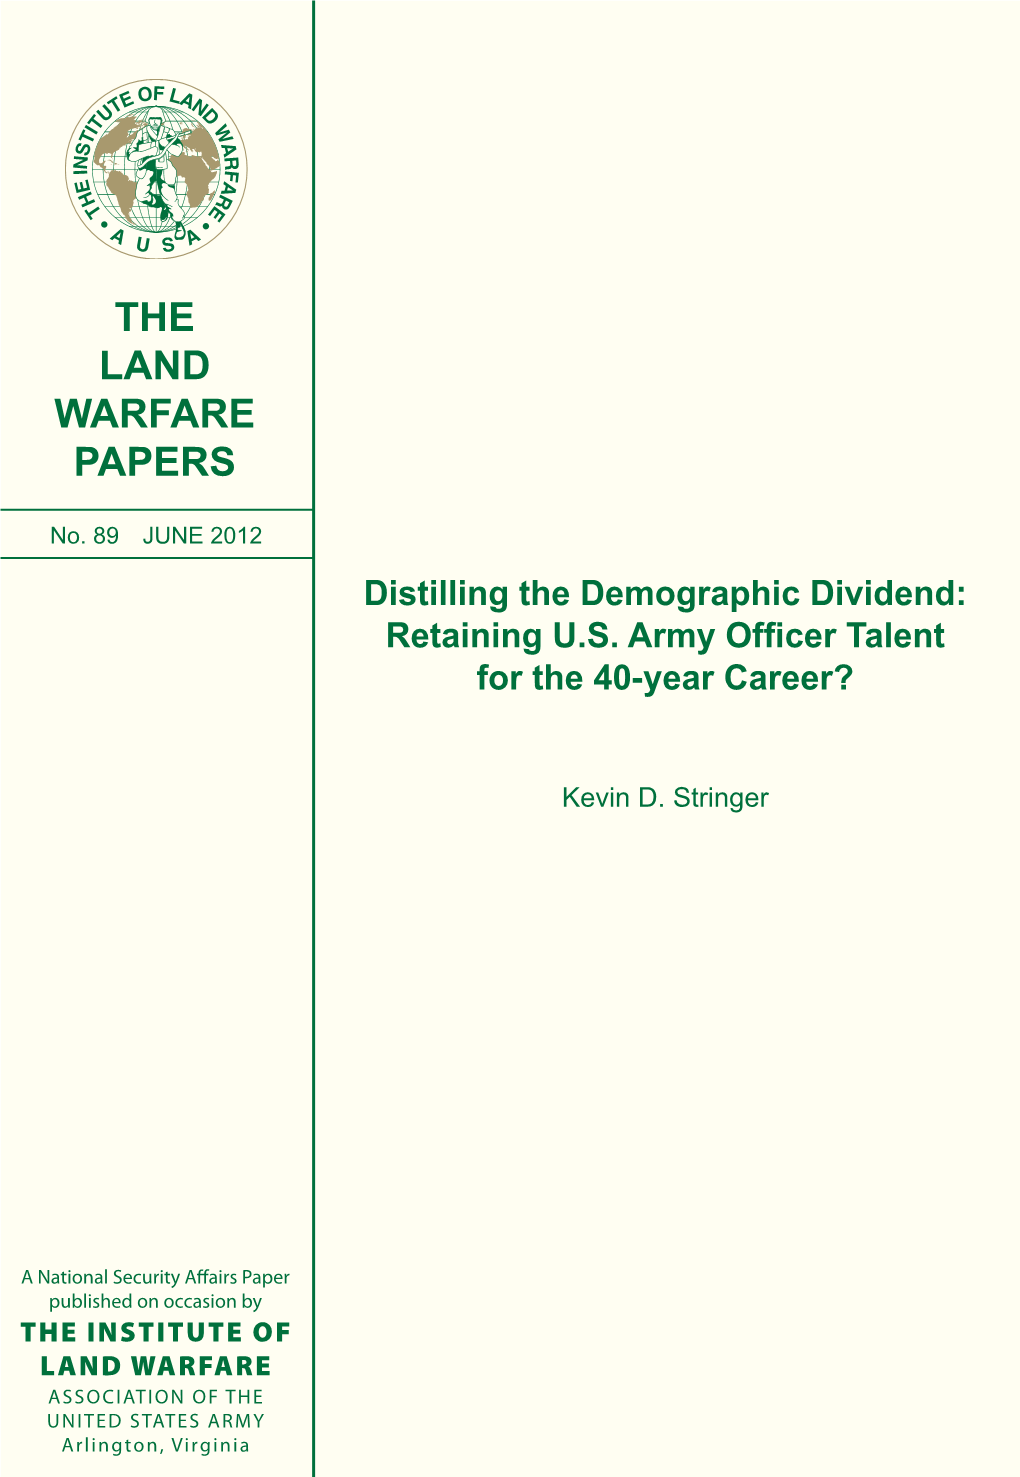 Distilling the Demographic Dividend: Retaining U.S. Army Officer Talent for the 40-Year Career?